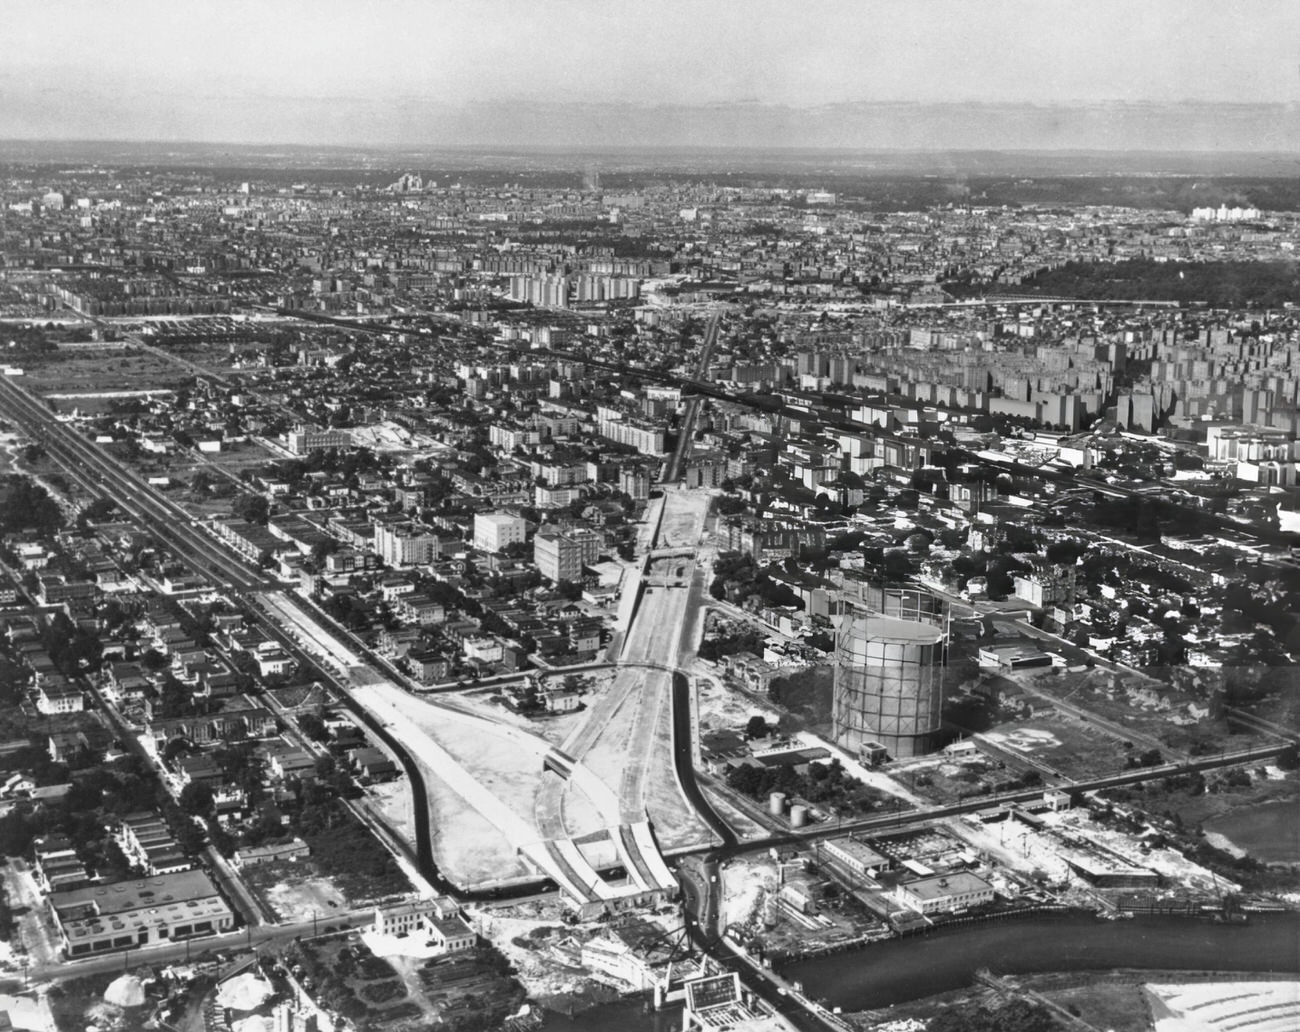 The Interchange At The East End Of The Cross Bronx Expressway And Bruckner Boulevard In The Bronx, 1950.